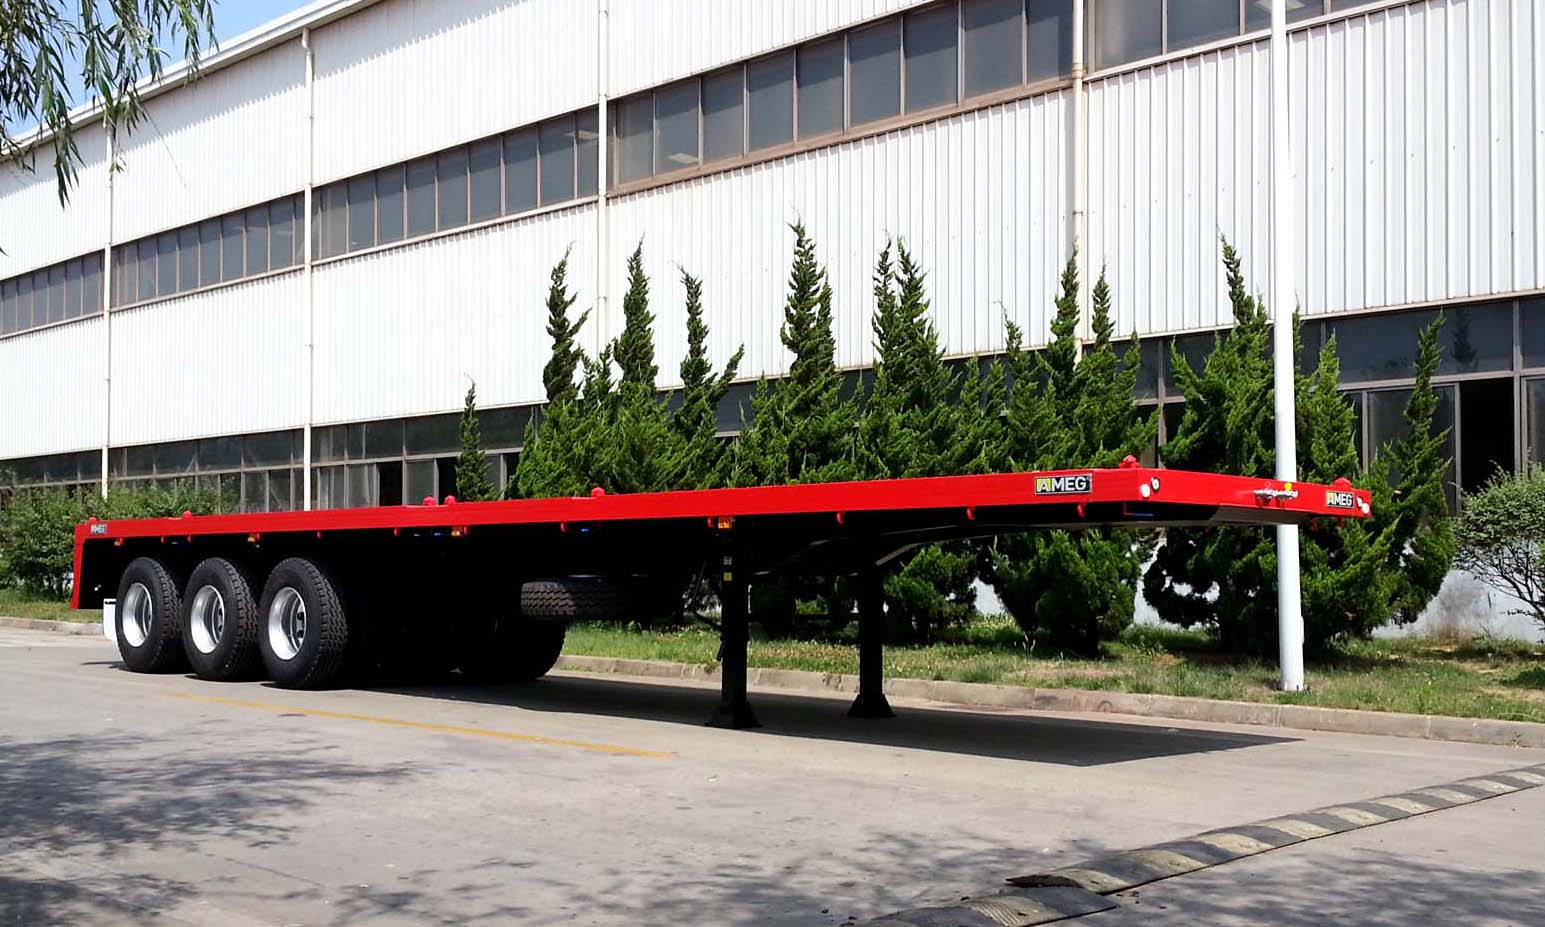 The most standard 40ft flatbed trailer with 3 axles